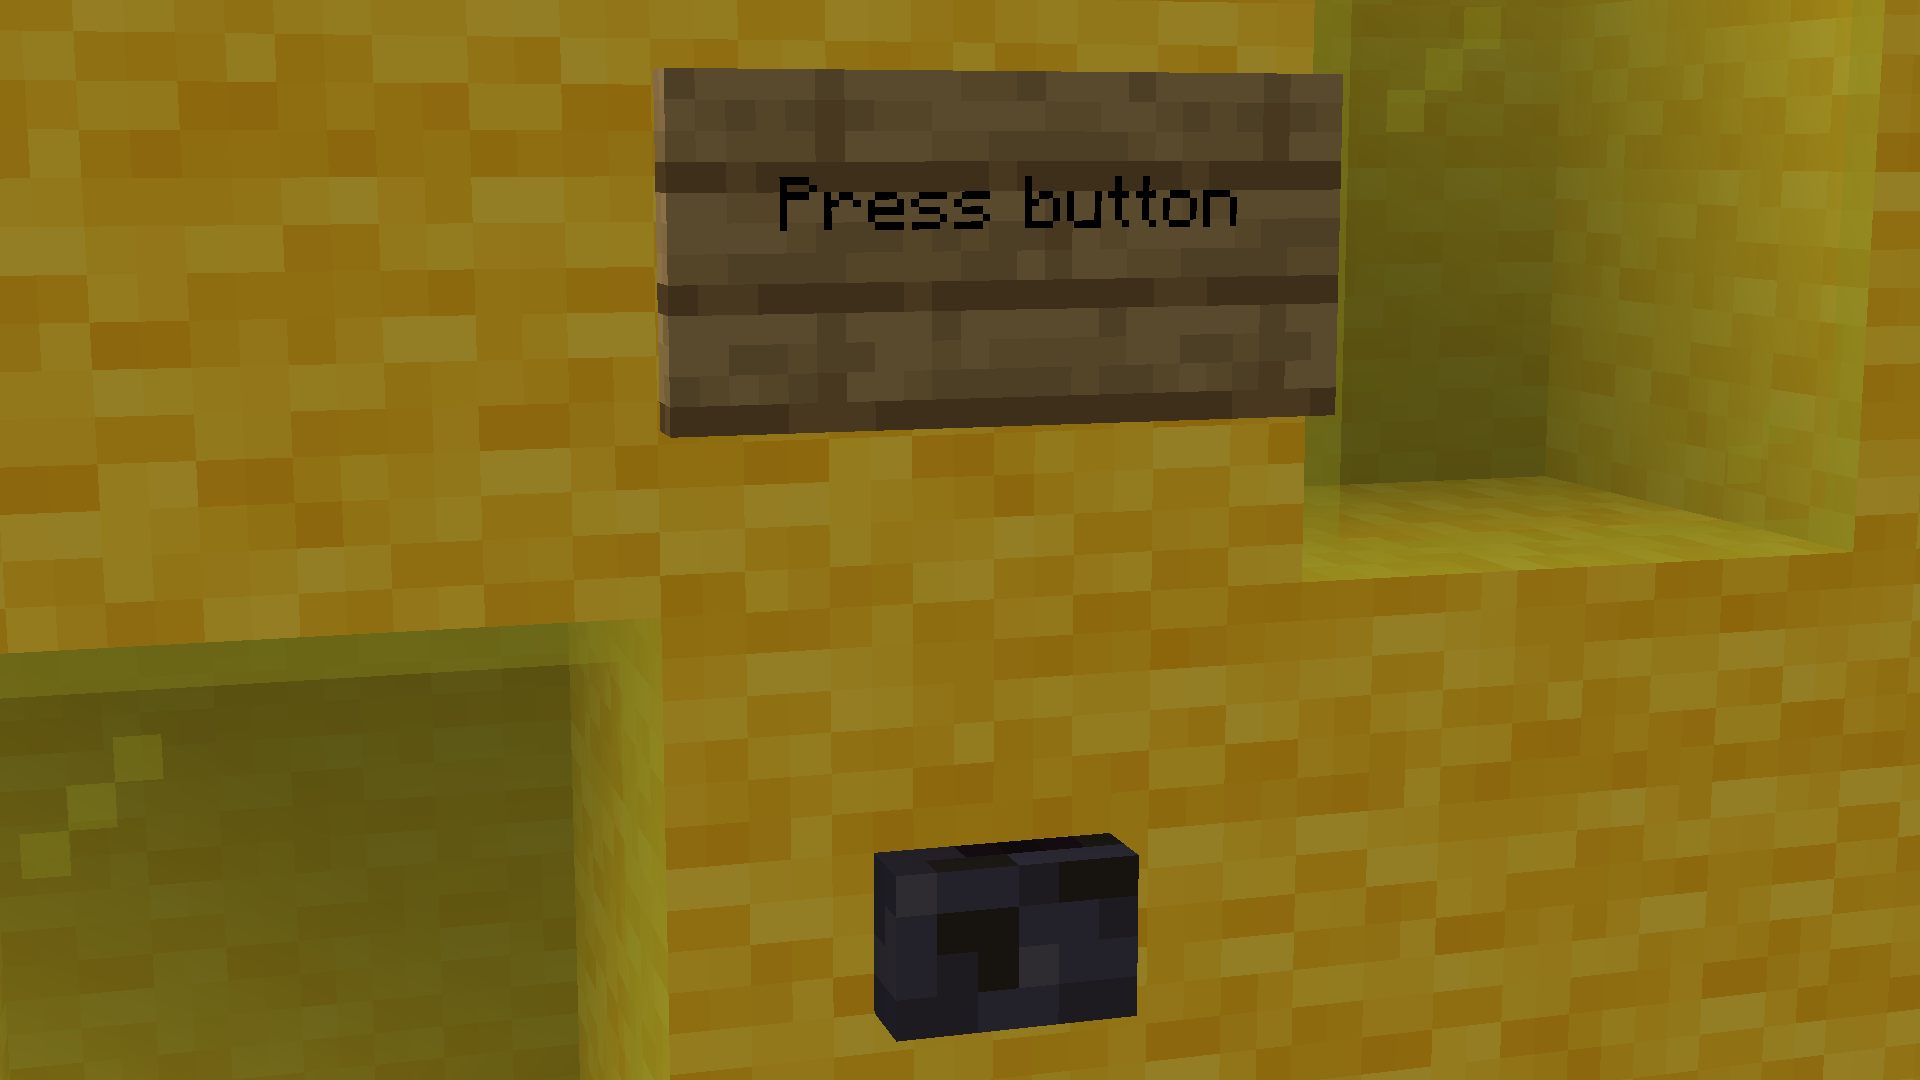 Press that button to win